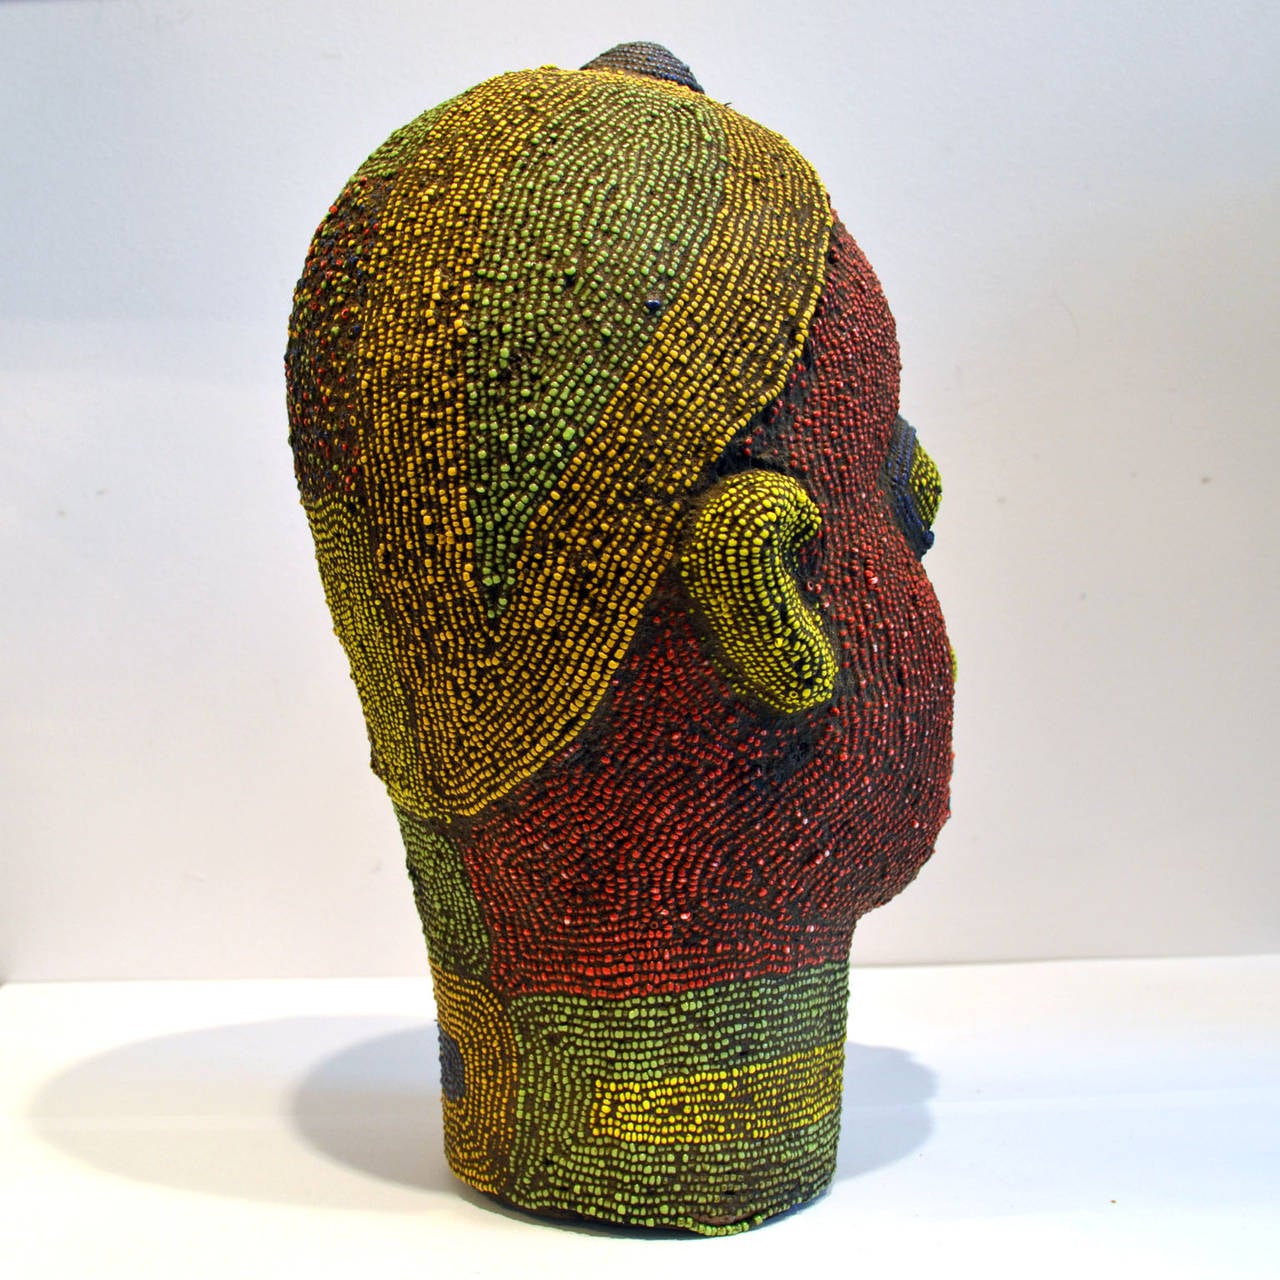 Hand-Crafted Female Beaded Sculpture